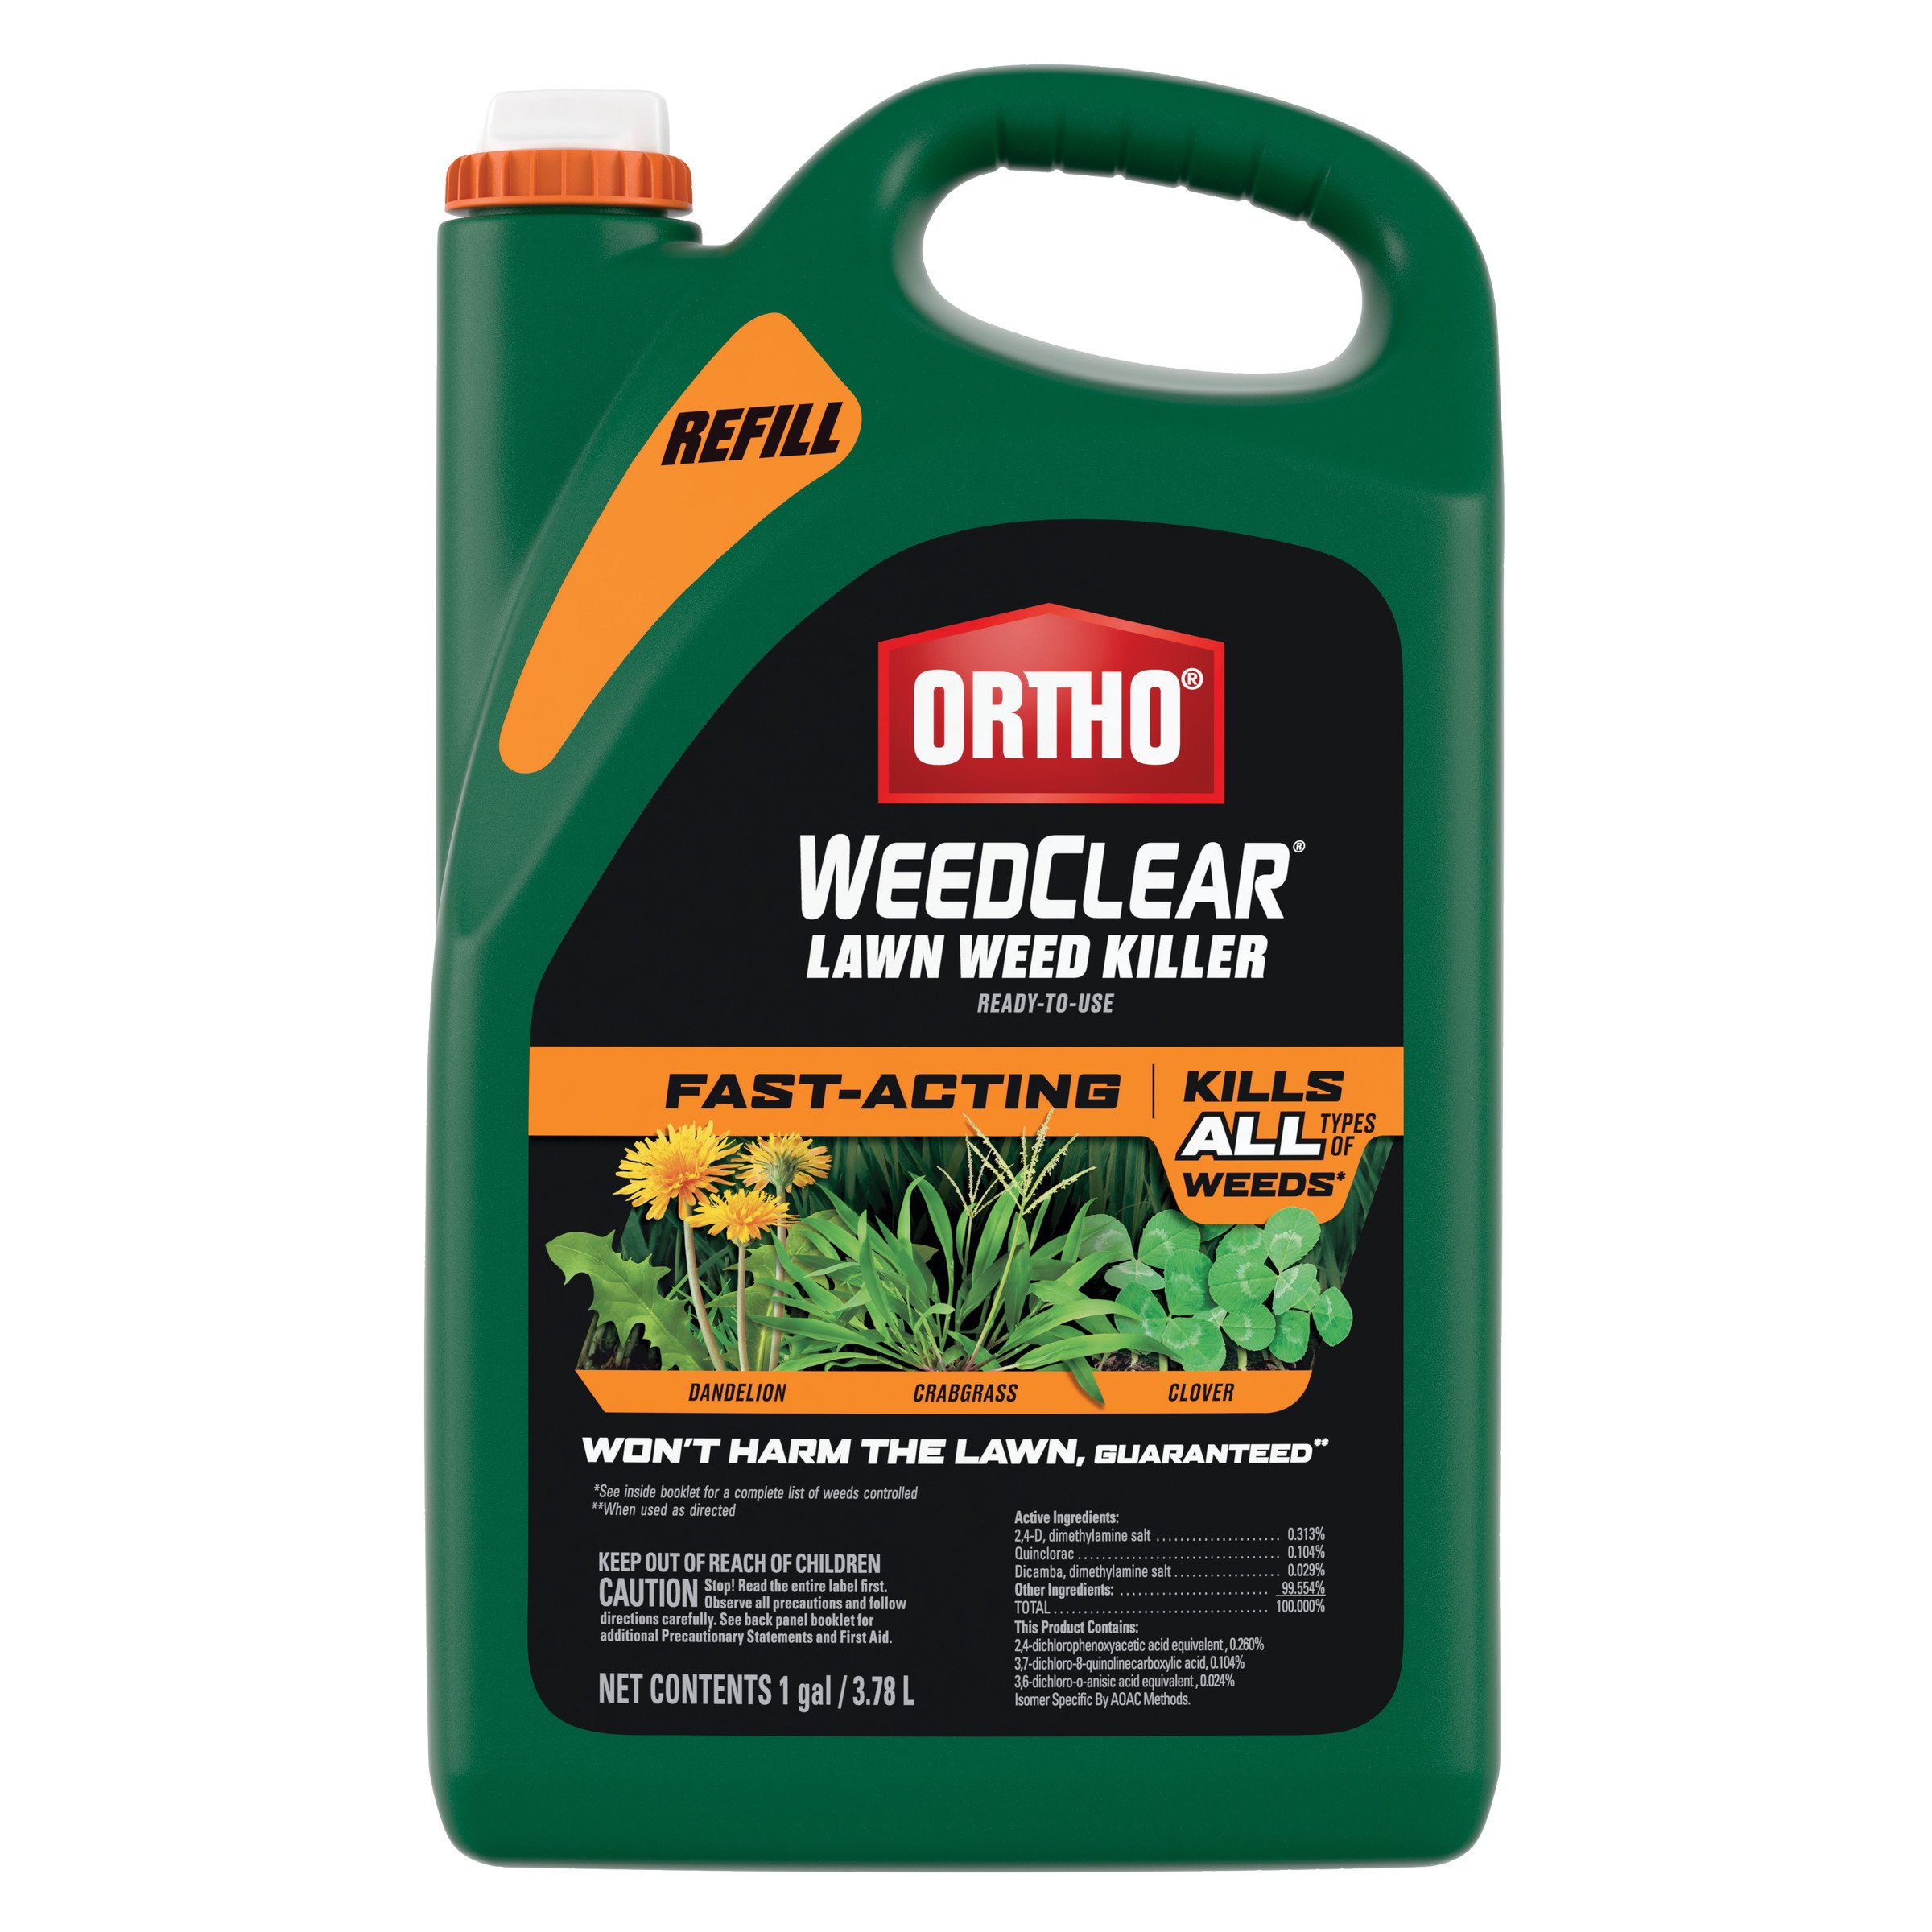 Ortho® WeedClear Lawn Weed Killer, Read-to-Use Refill, 1 Gallon Bottle